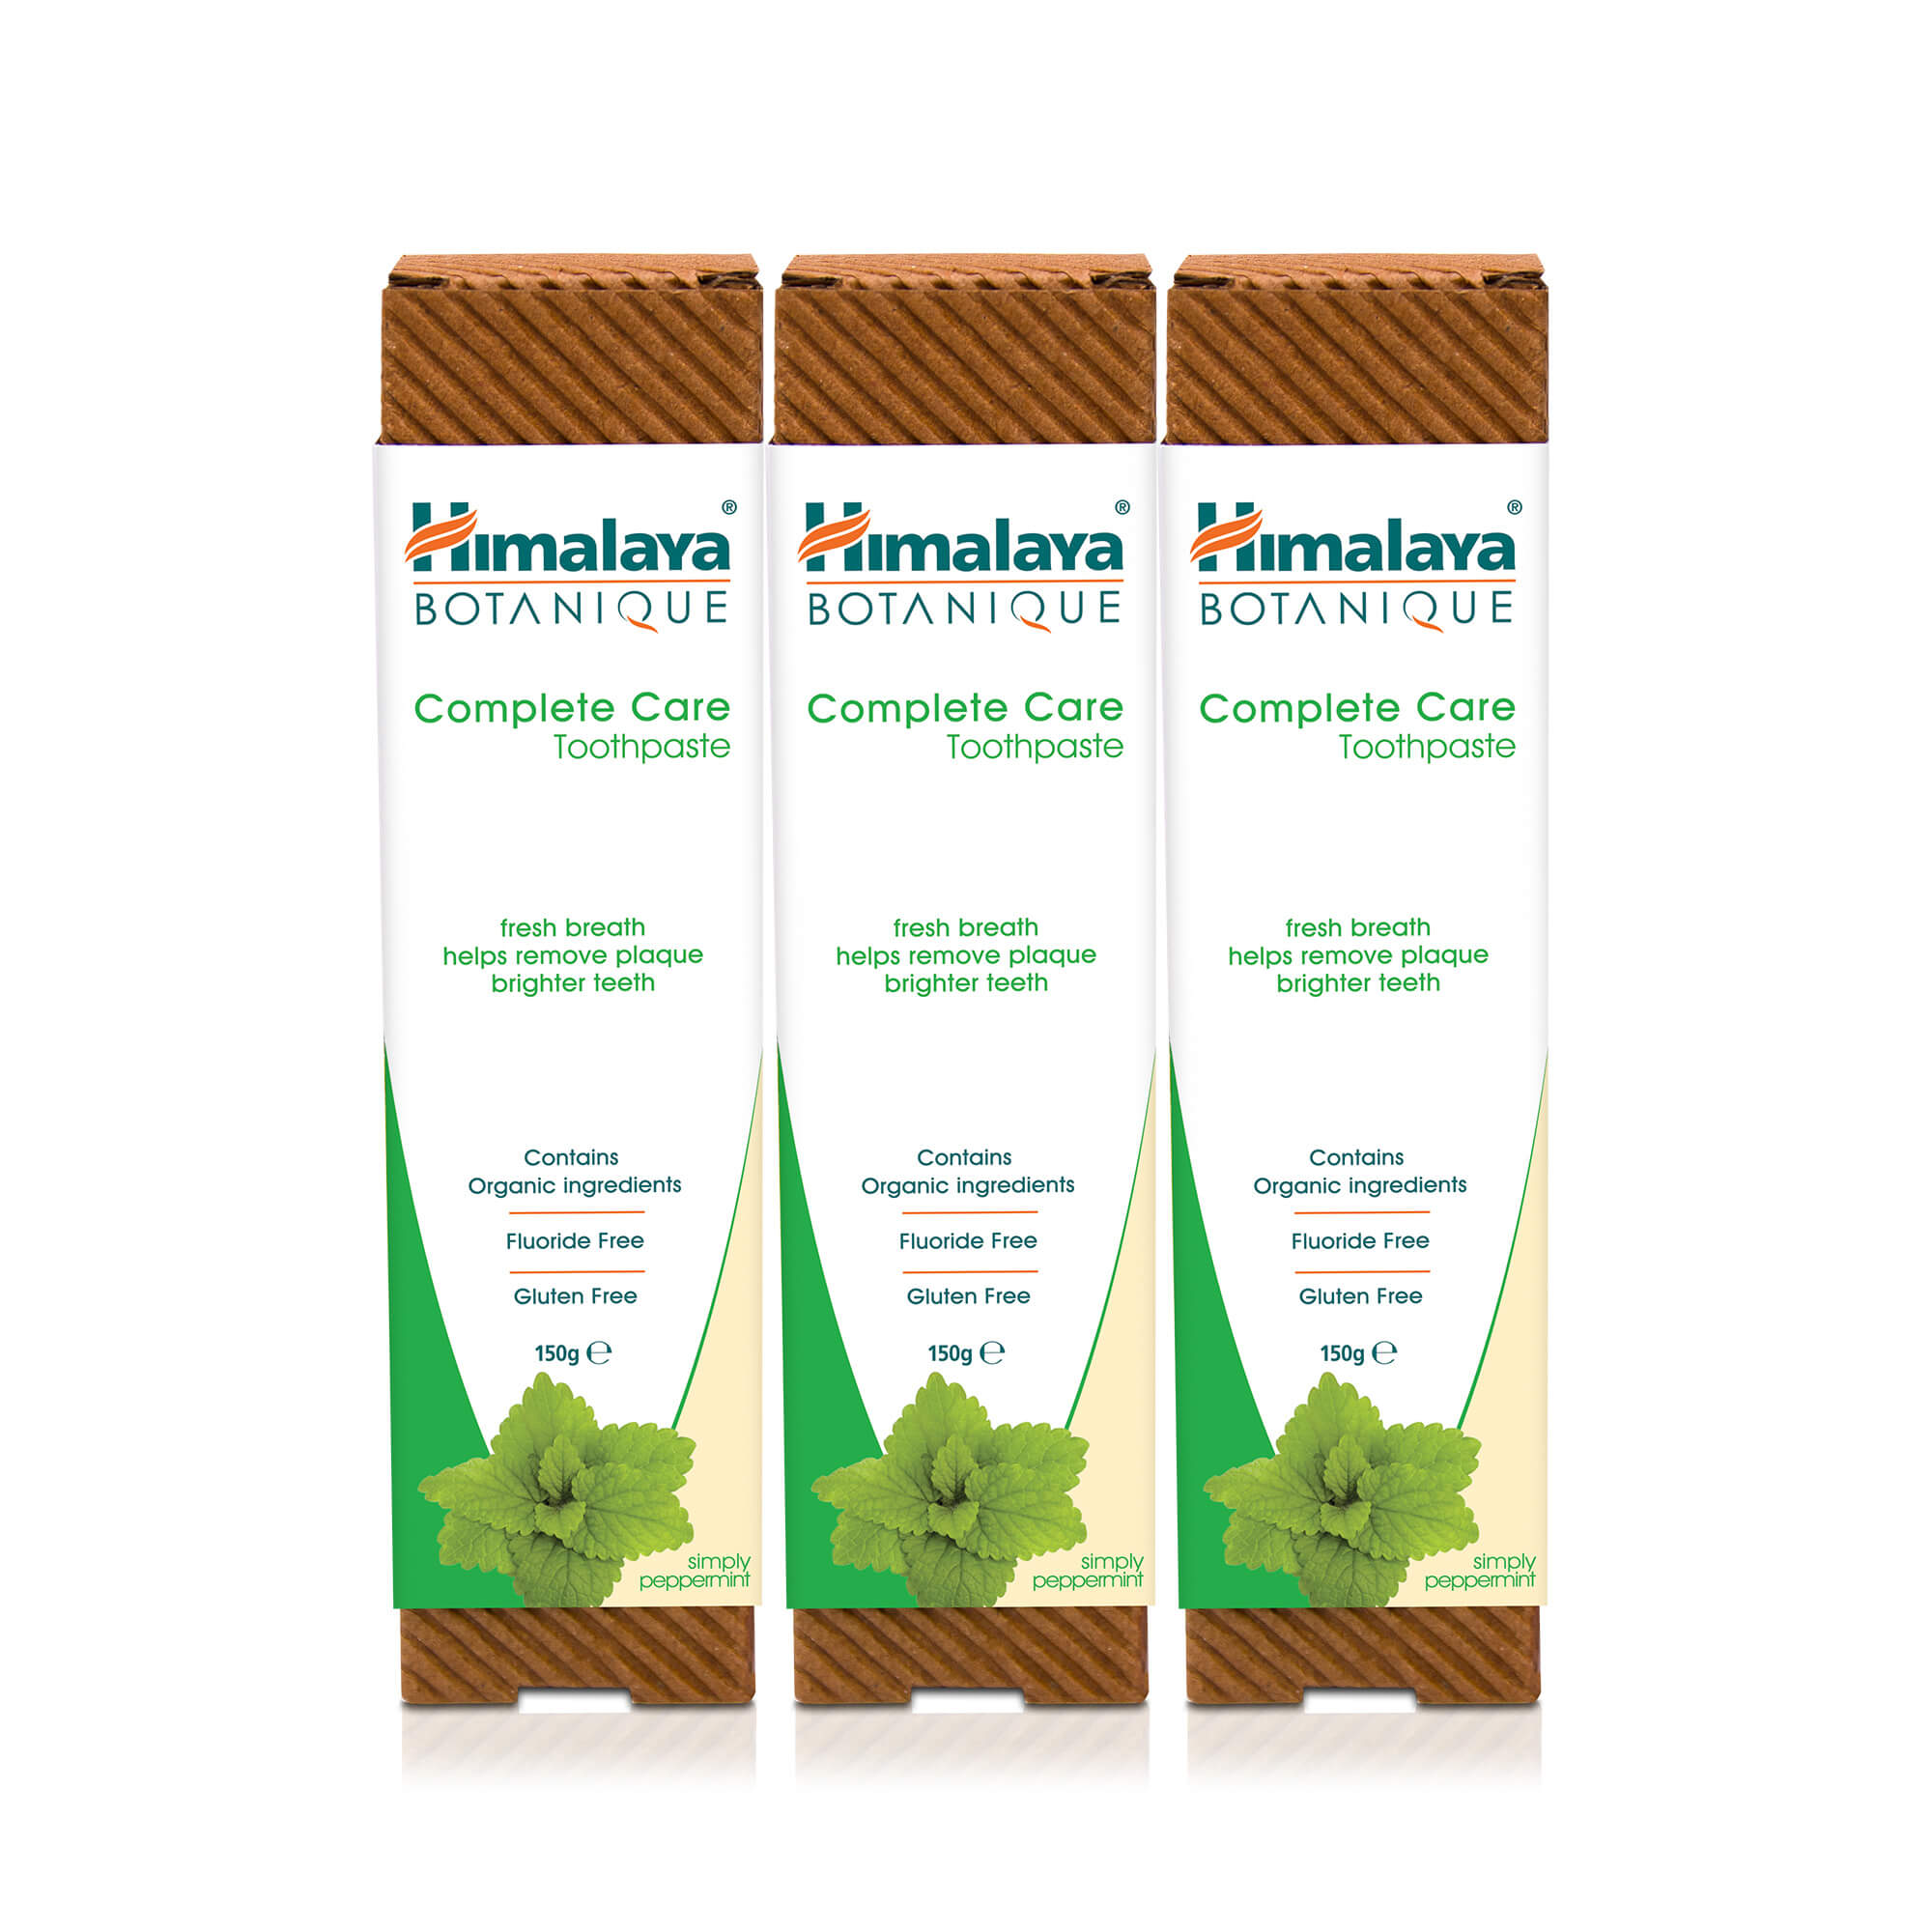 Himalaya BOTANIQUE Complete Care Toothpaste - Simply Peppermint - 150g (Pack of 3)